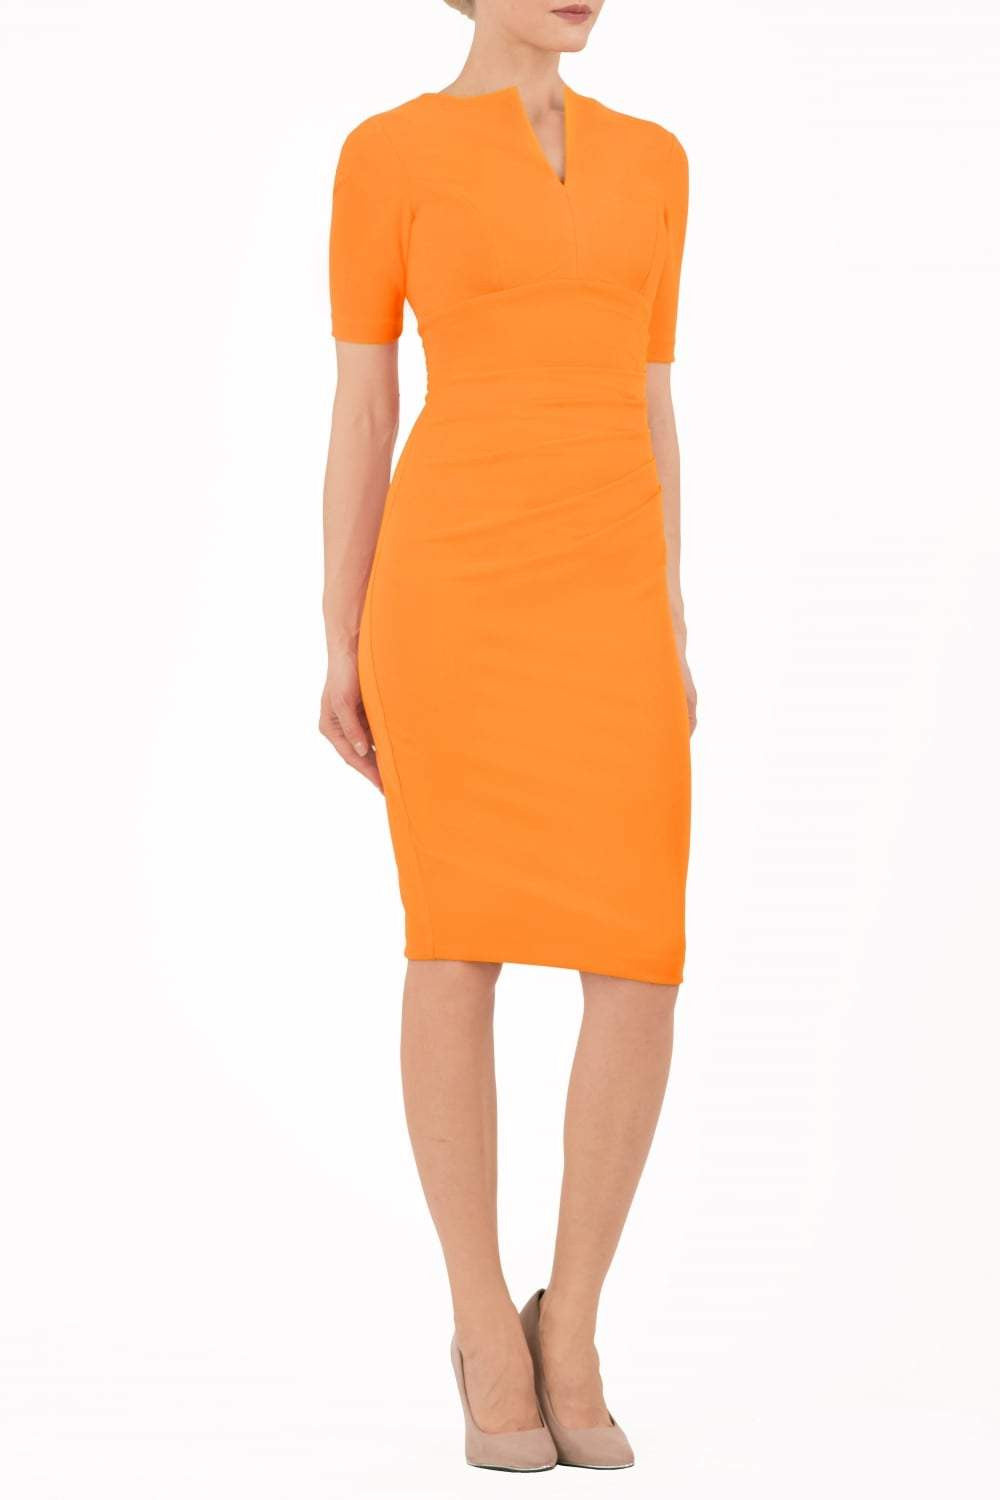 model is wearing diva catwalk lydia short sleeve pencil fitted dress in sun orange colour with rounded neckline with a slit in the middle back